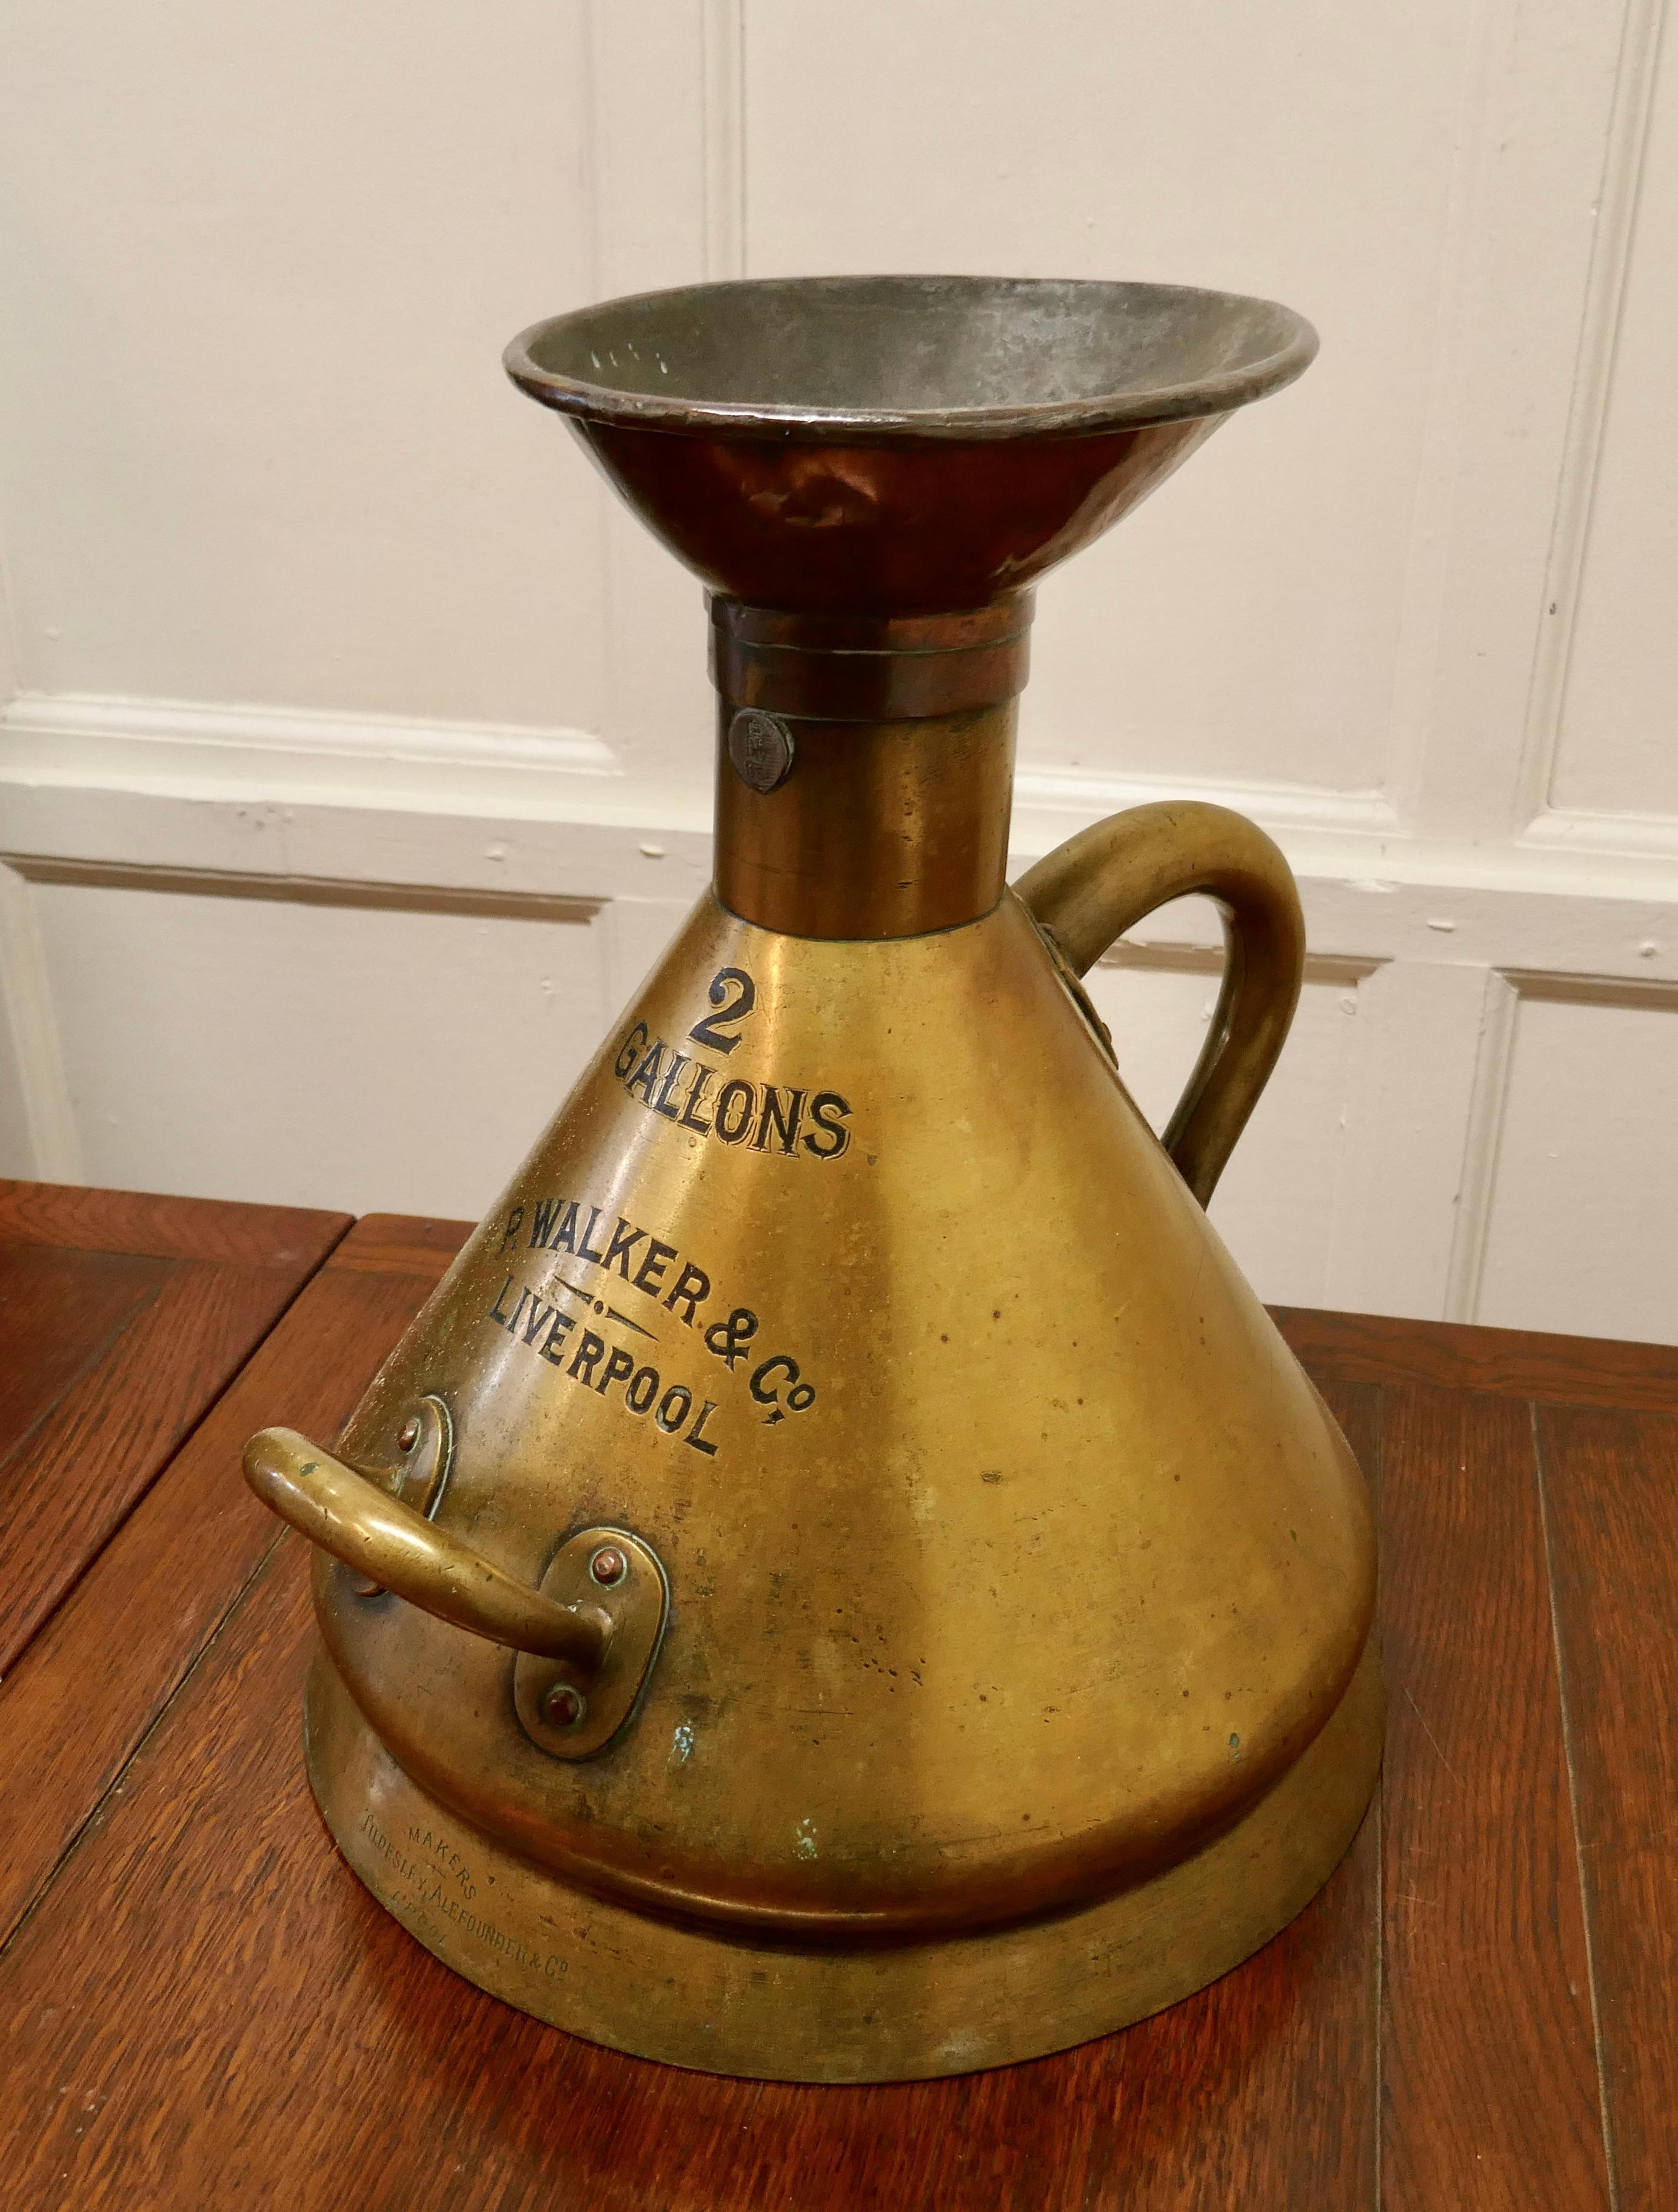 Automobile Petrol Measure, R Walker & Co., Liverpool


Brass Two Gallon Automobile Petrol Measure, R Walker & Co., Liverpool, this is a large and very heavy piece made in brass and lined in metal, possibly lead with conical shape and 2 handles, the